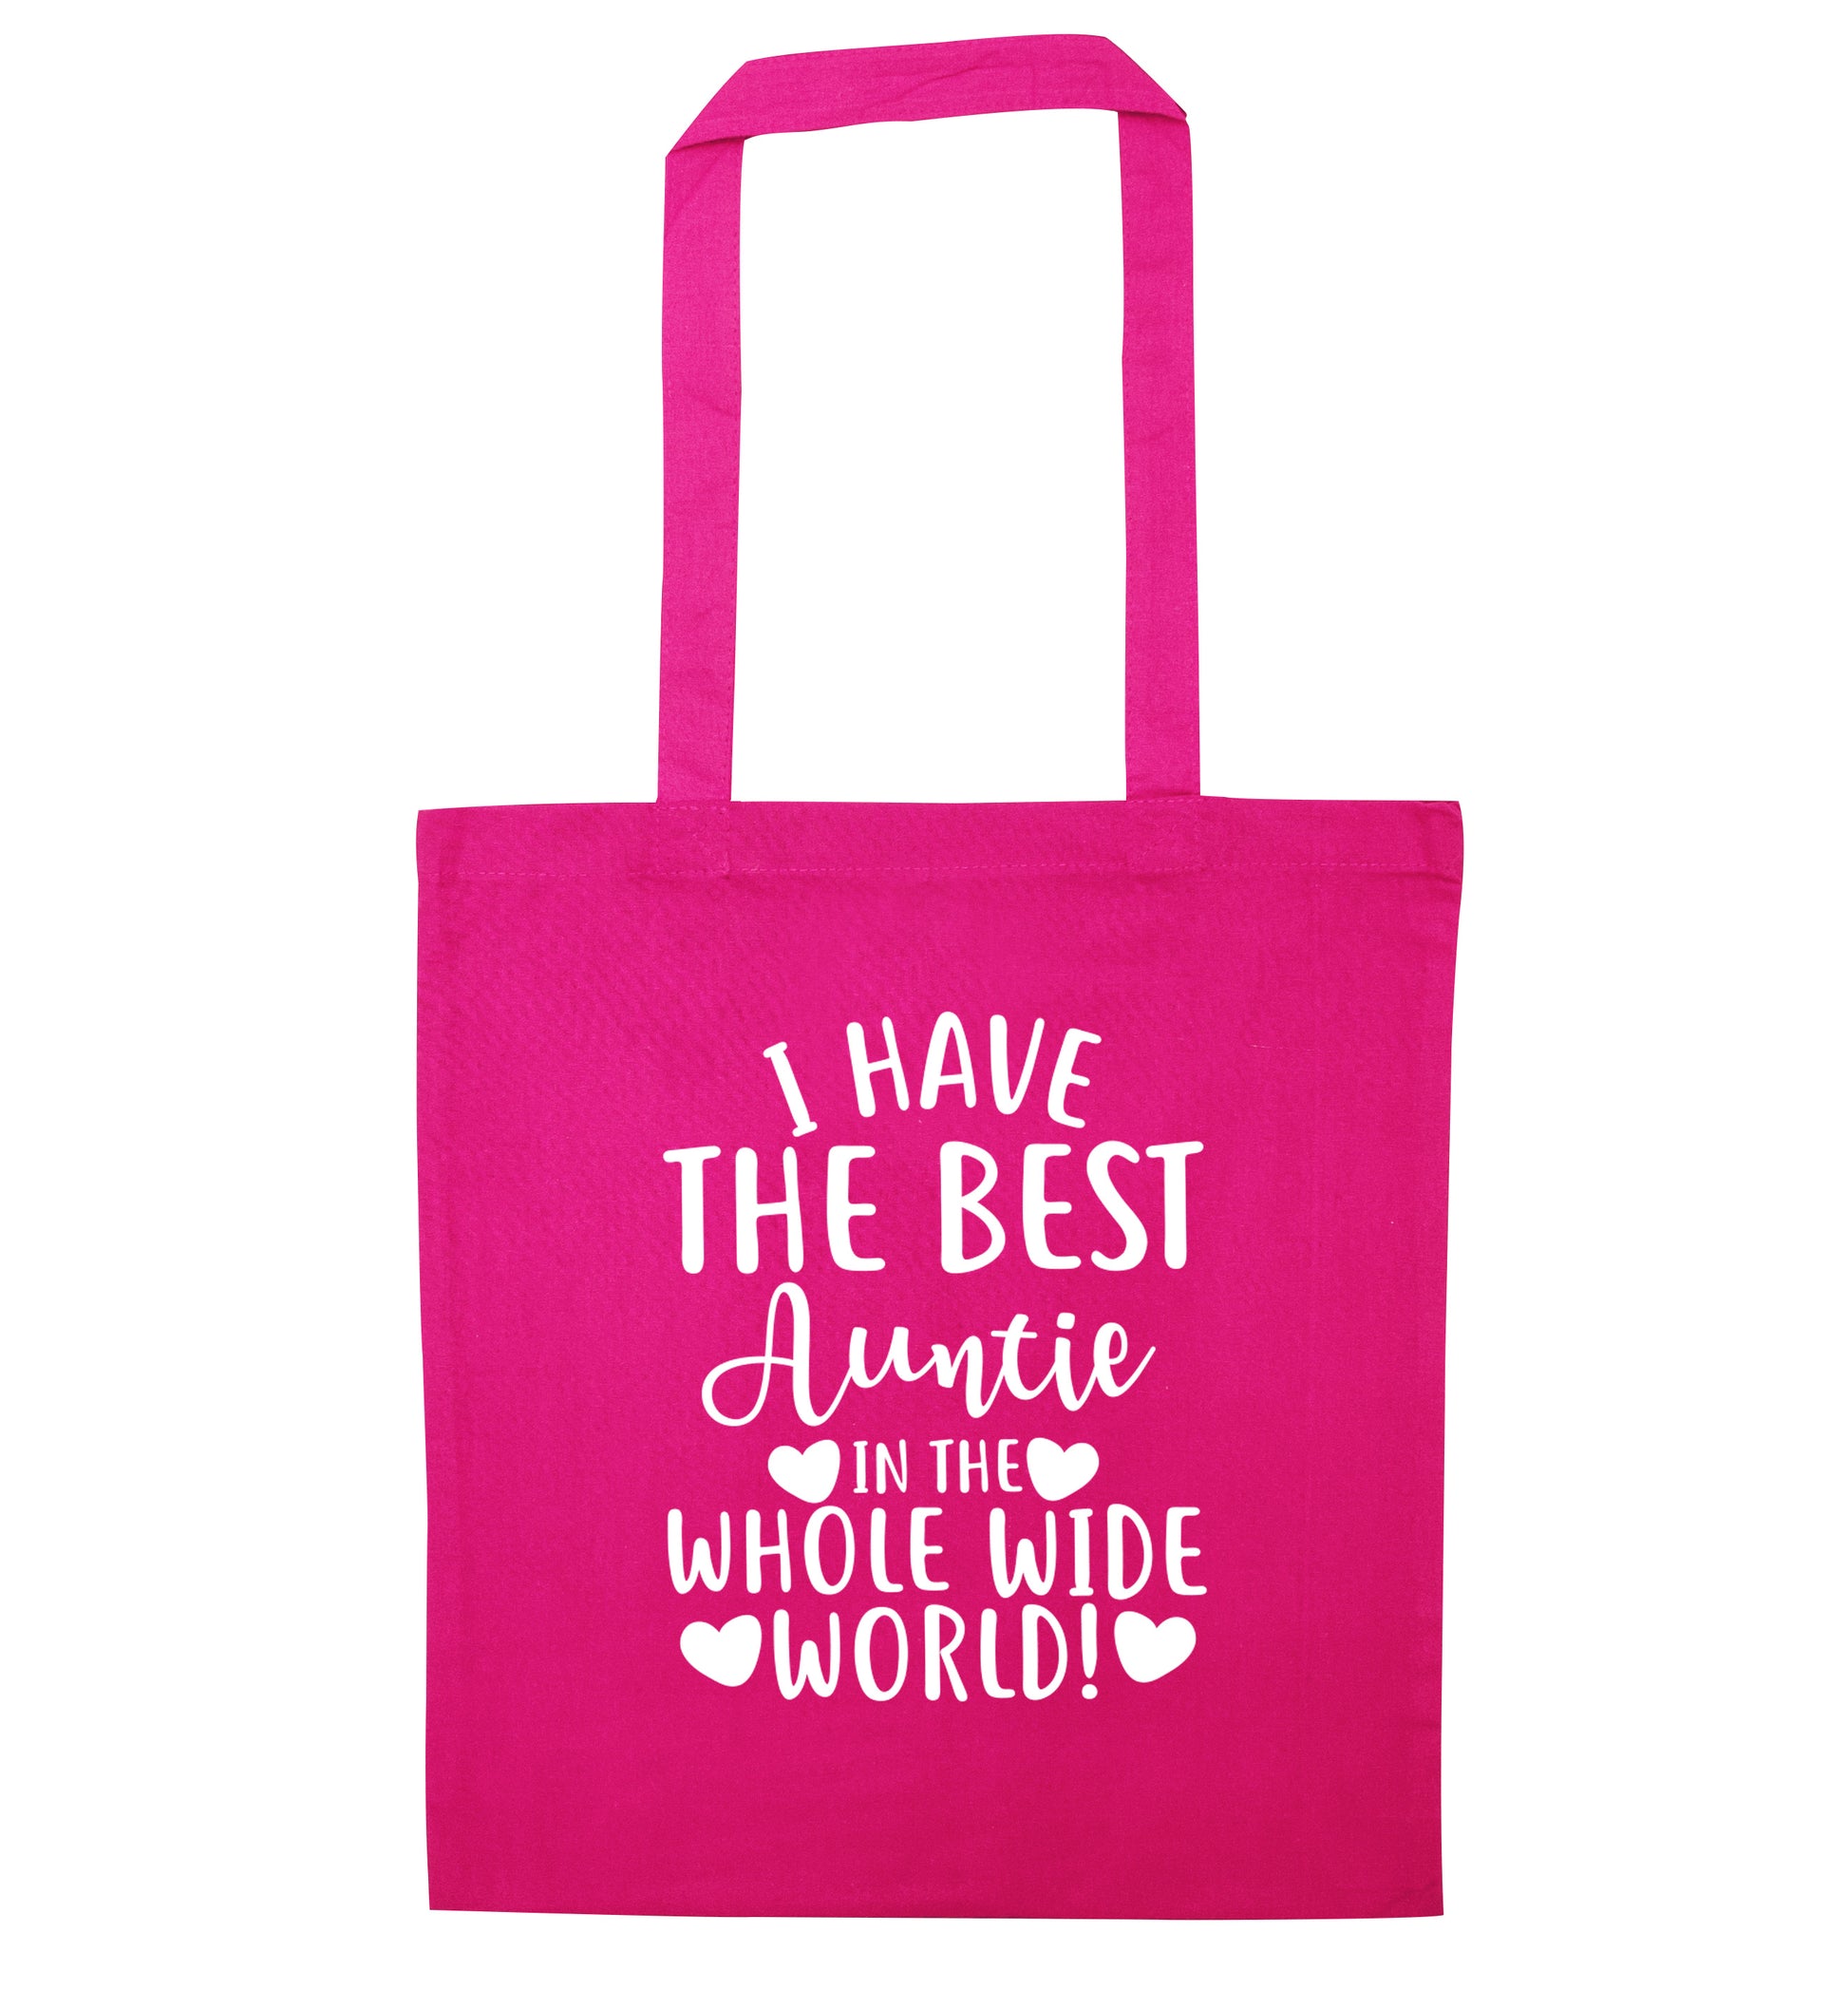 I have the best auntie in the whole wide world! pink tote bag